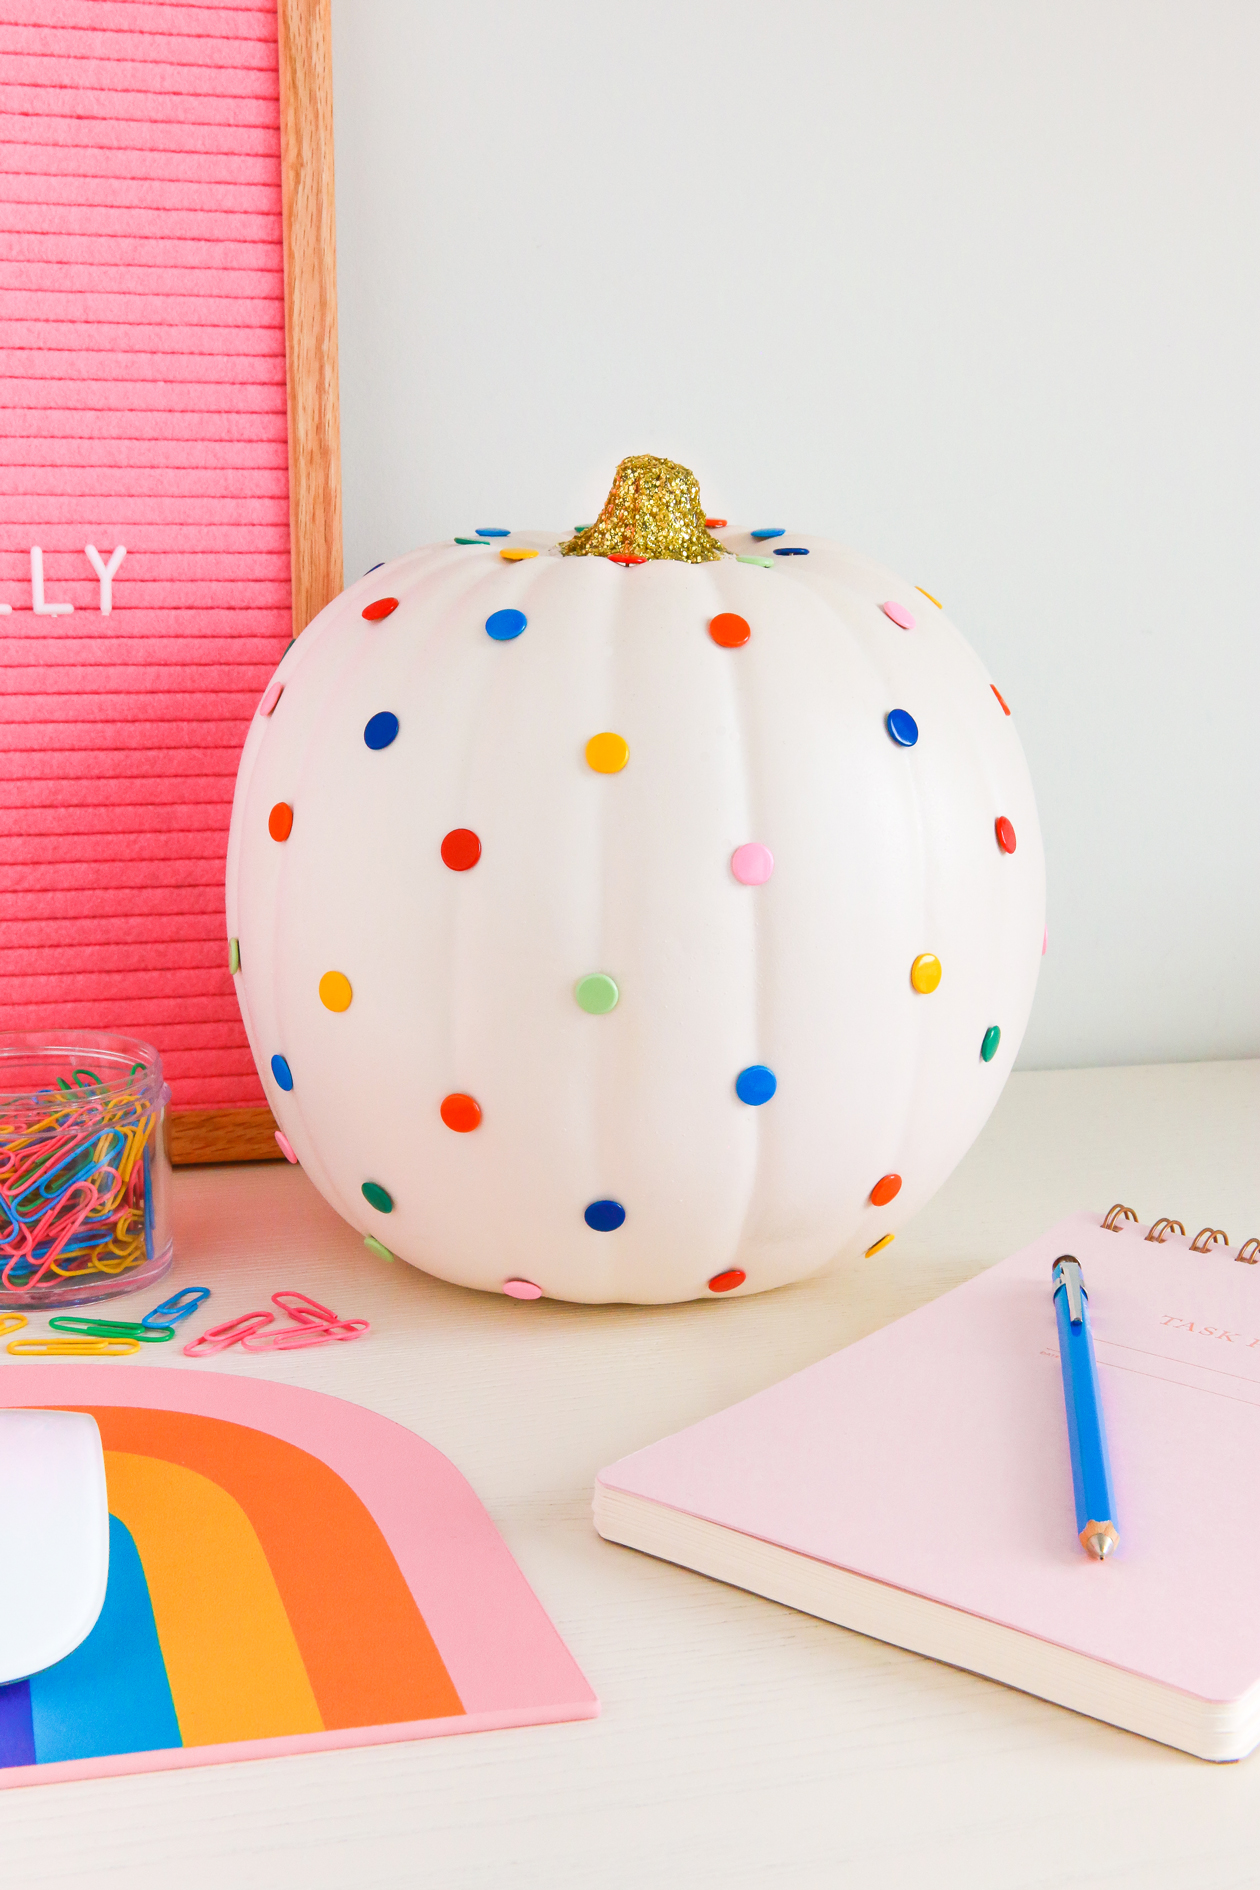 Looking for ways to decorate pumpkins for Halloween? Make this DIY Push Pin Pumpkin in a few minutes! It's cute, colorful, functional, and perfect for Halloween!